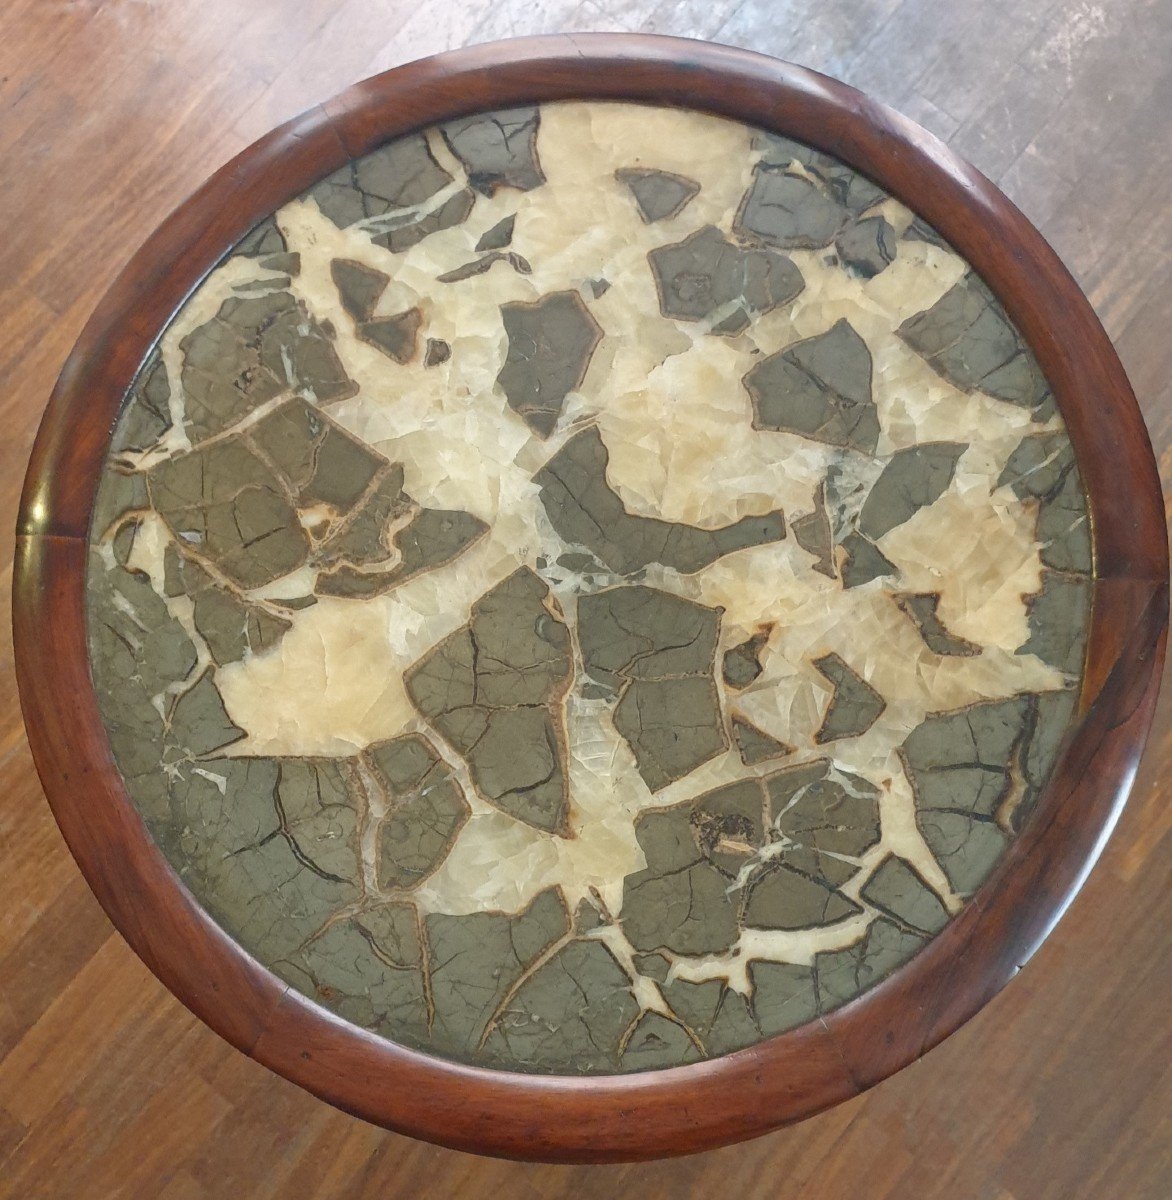 Georgian Occasional Round Table With Septarian Marble Top, Late XVIII Century Early XIX Century-photo-4